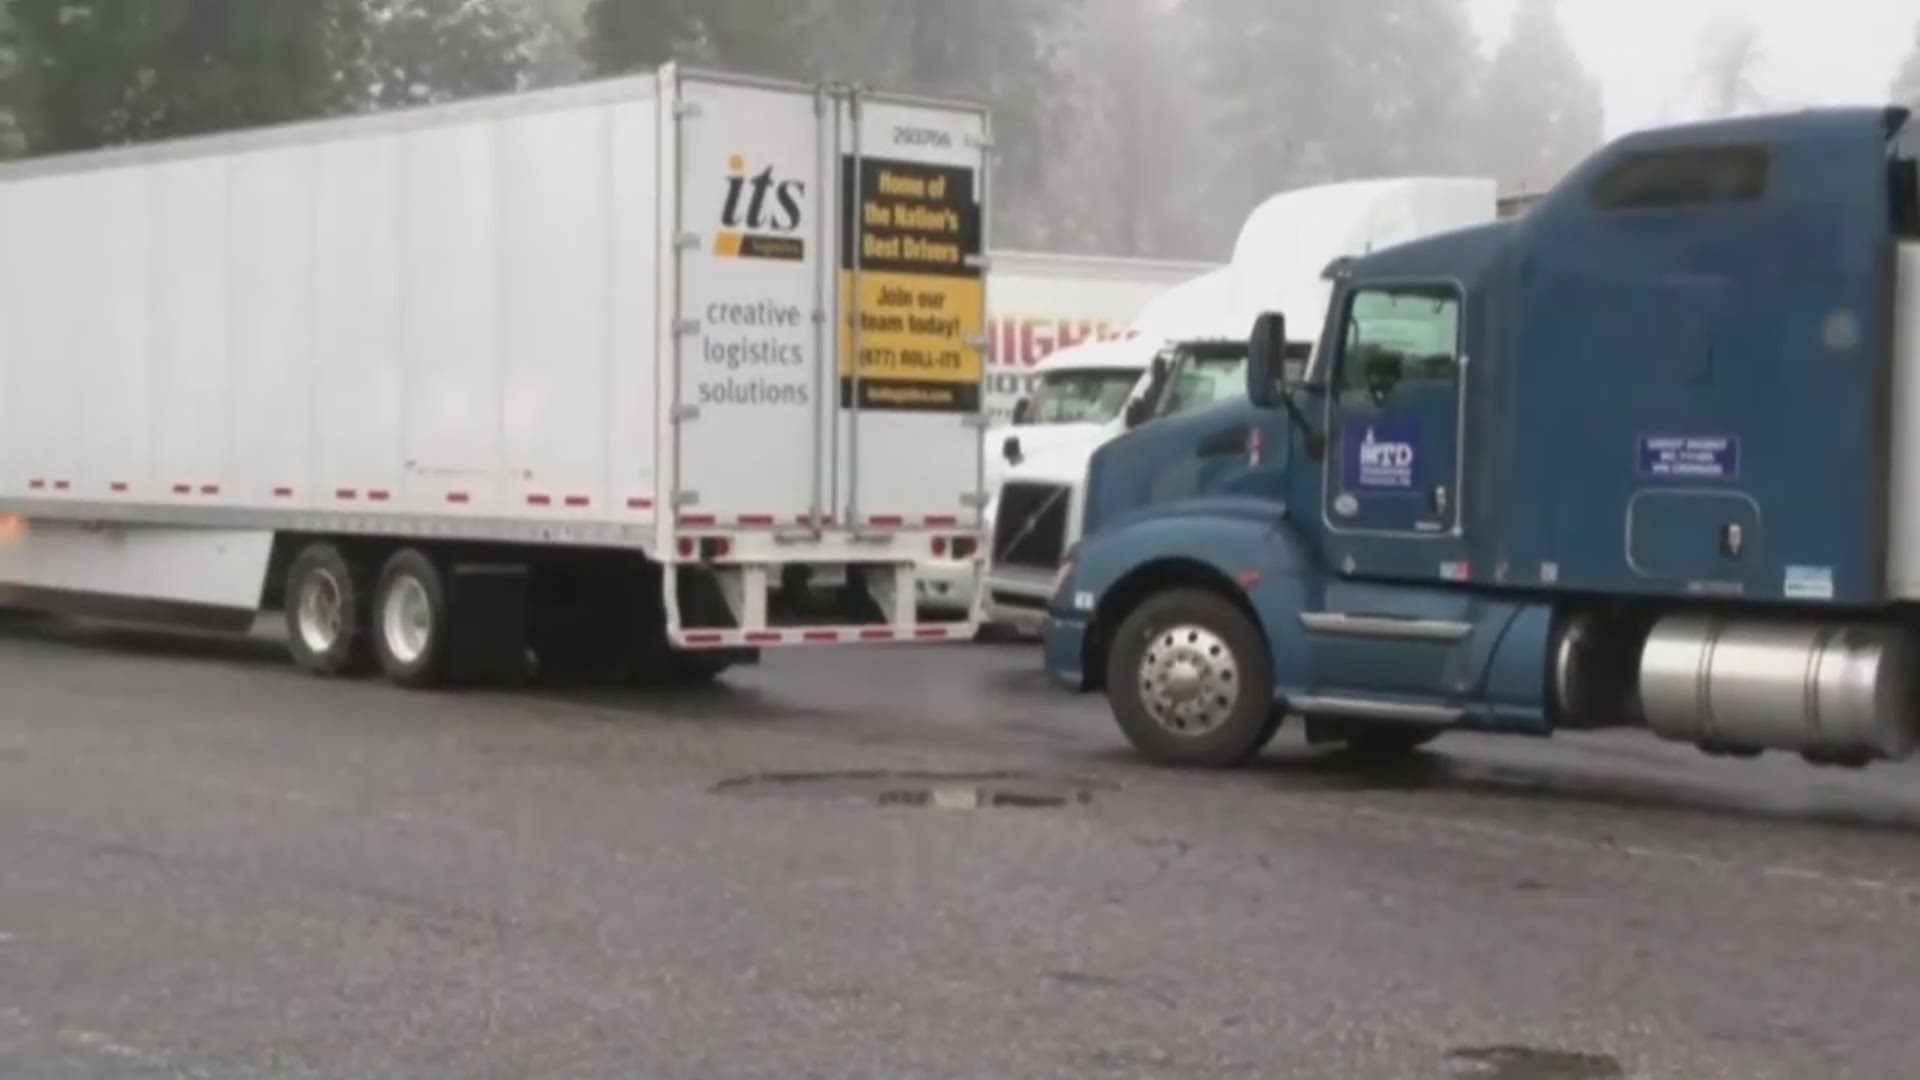 Late spring snow is causing problems for drivers in Northern California. Caltrans closed down eastbound interstate 80 because of snow and a jackknifed semi.